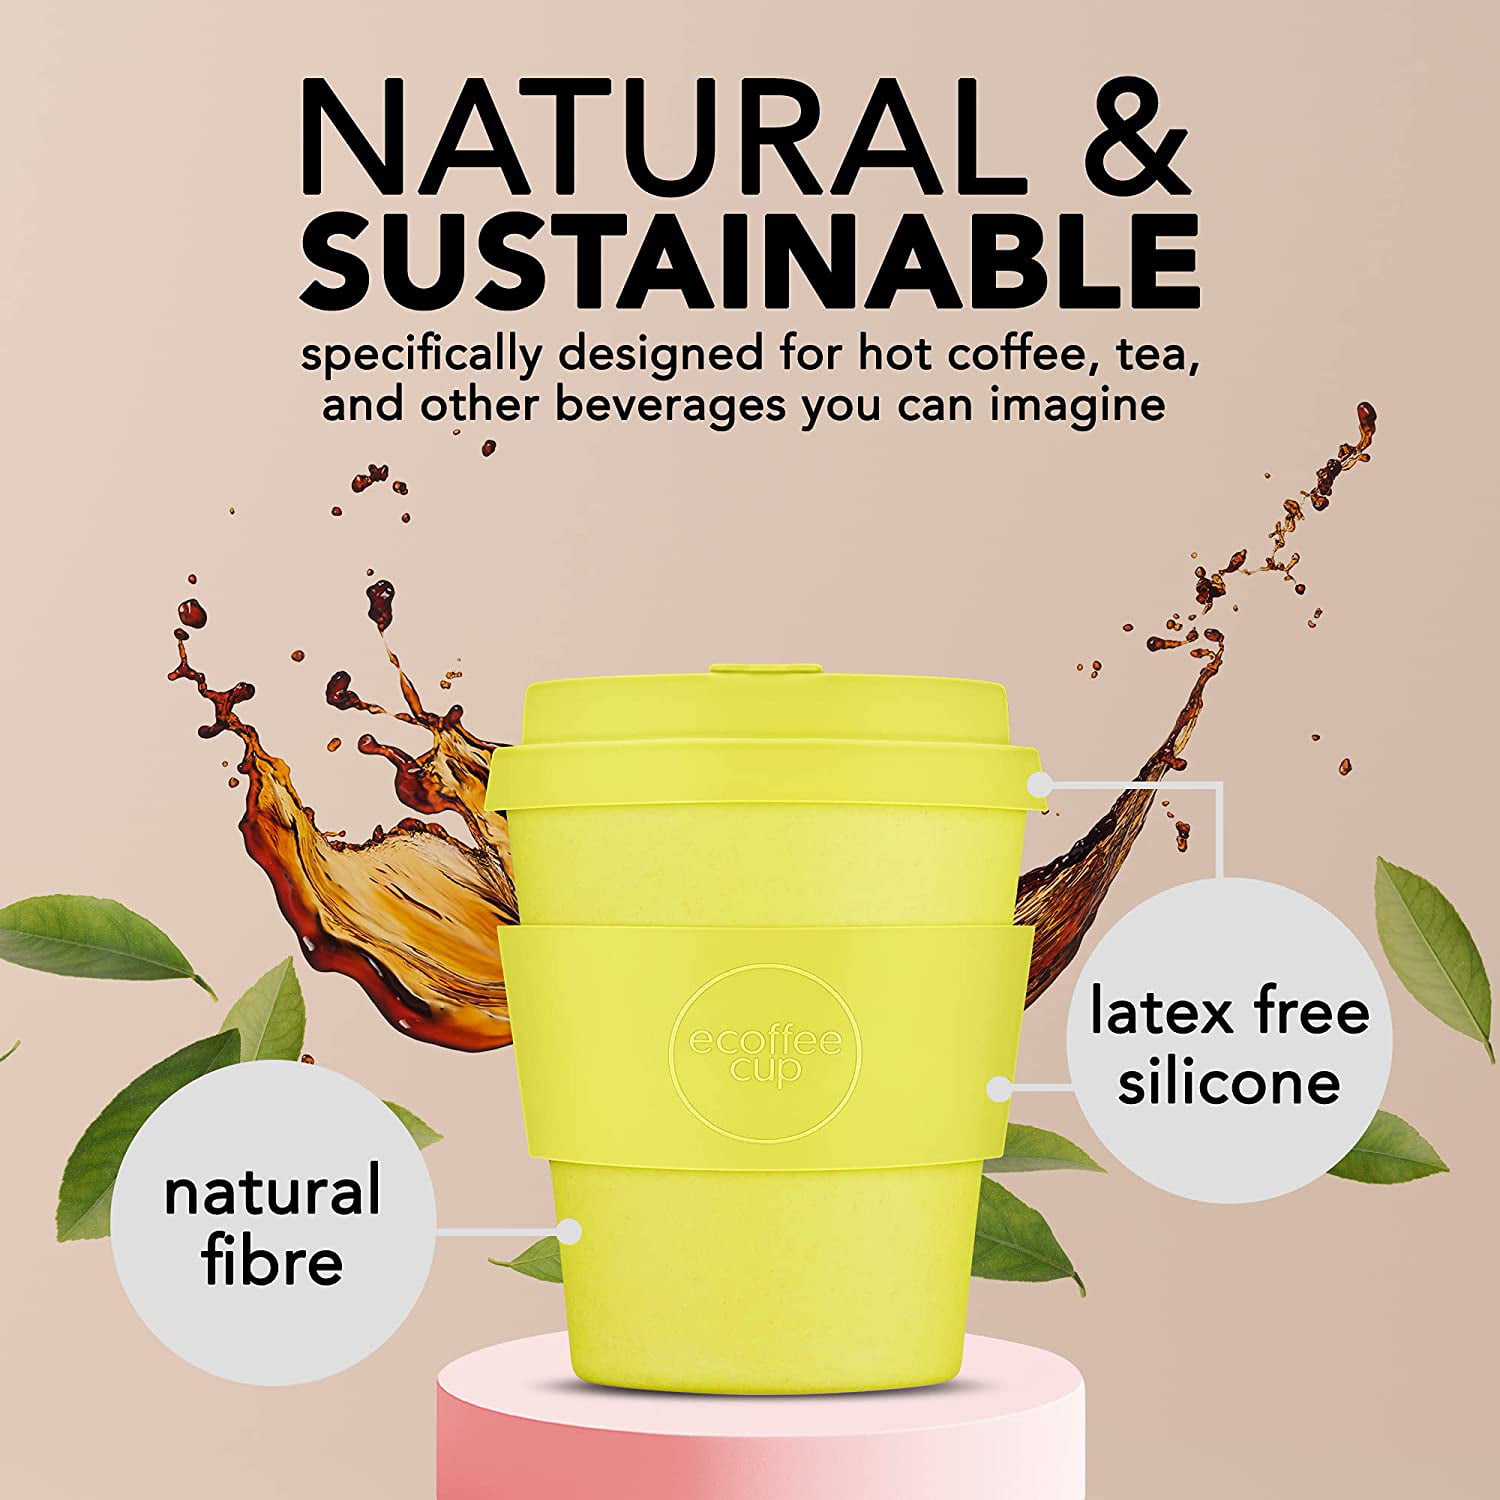 Dream Lifestyle 350ml/450ml/550ml Reusable Sustainable To-Go Travel Coffee- Cup - Ecoffee Cup - Portable Cups With No Leak Silicone Lid - Dishwasher  Safe 